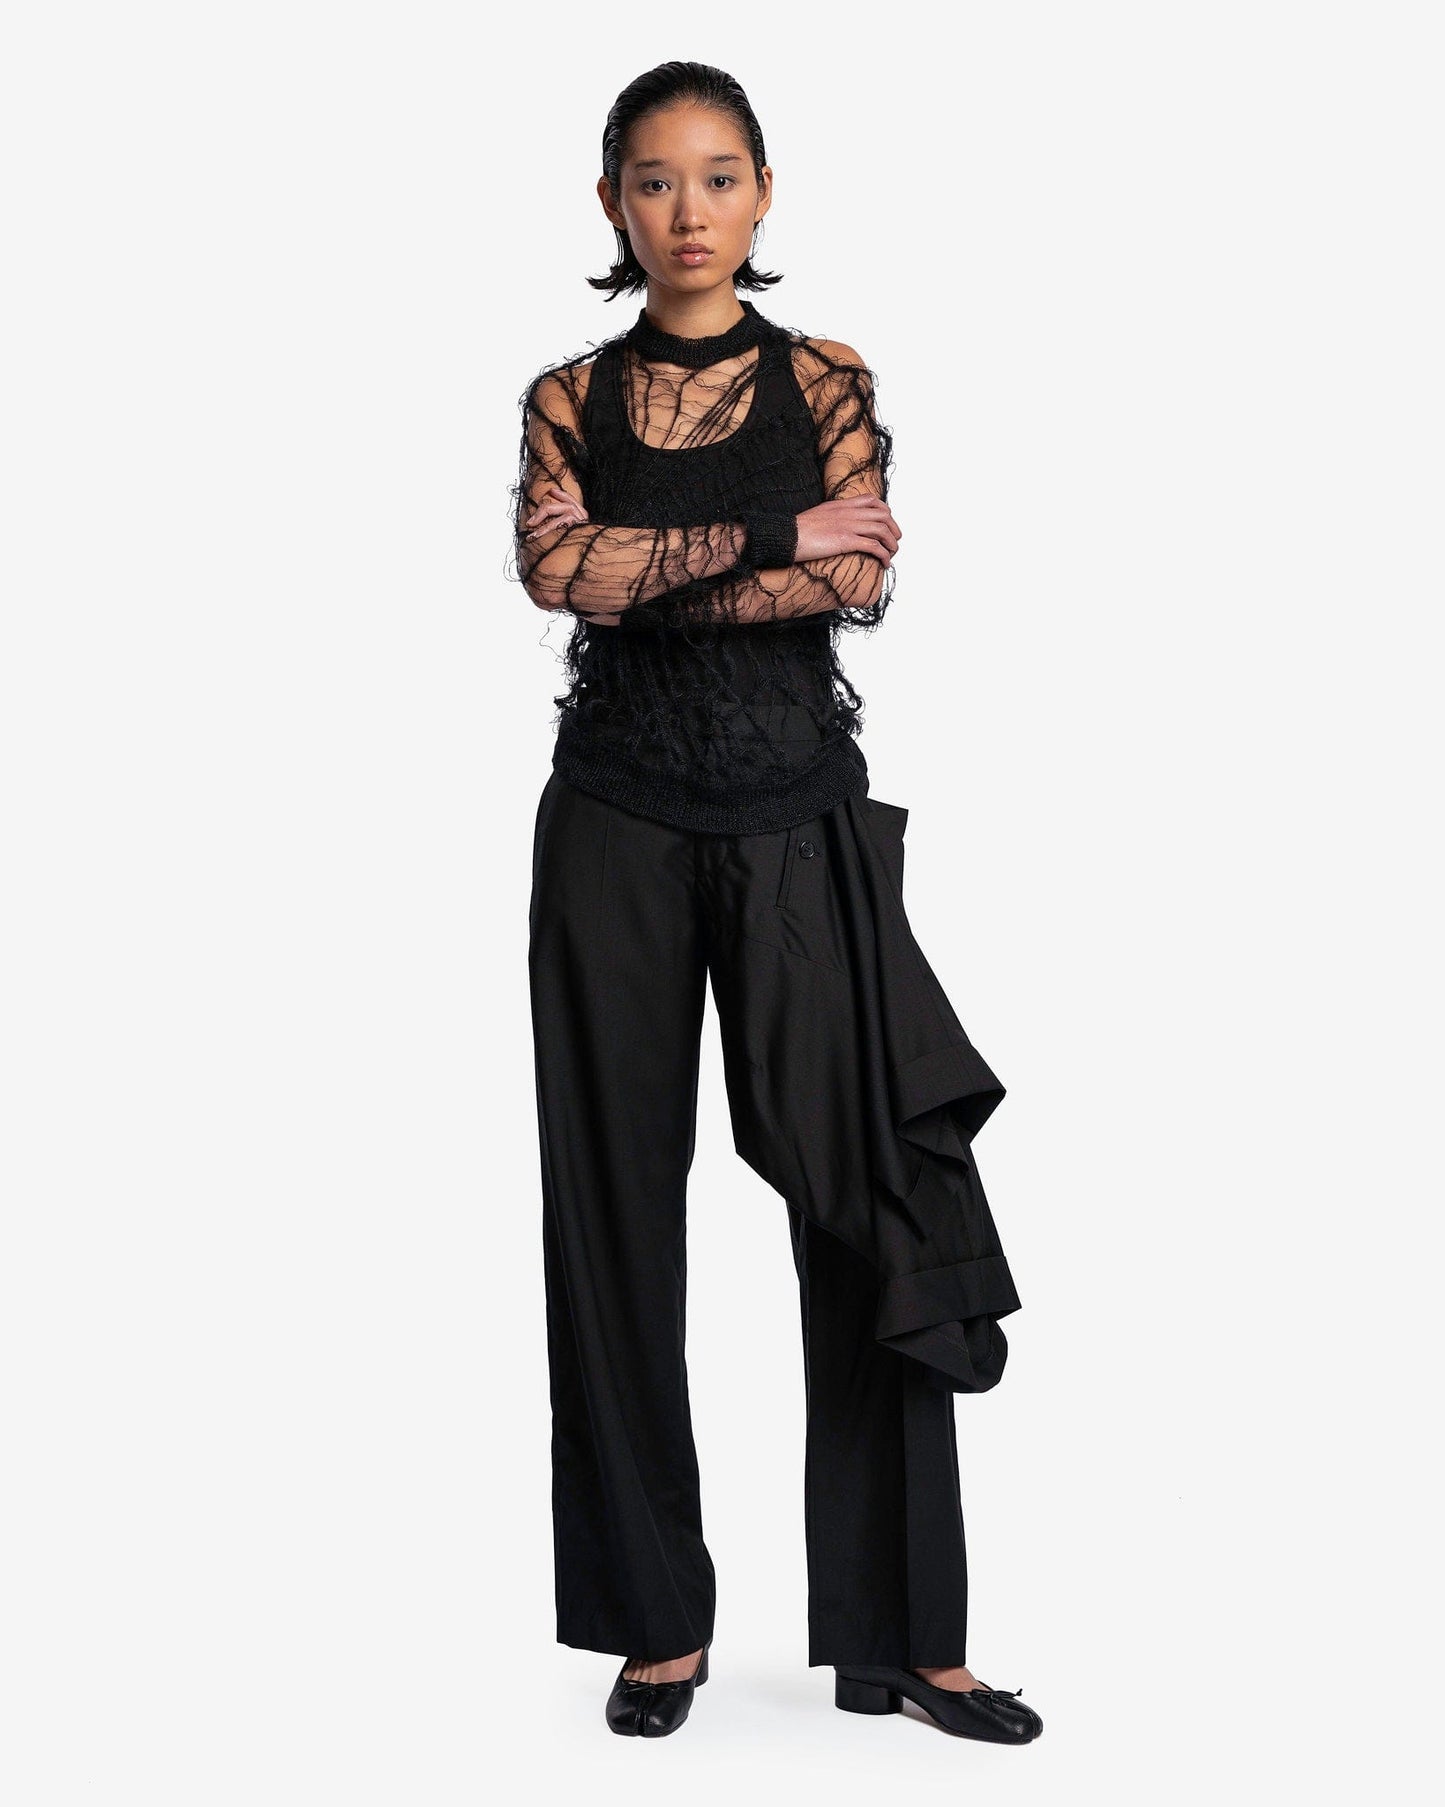 UNDERCOVER women's pants Layered Trousers in Black